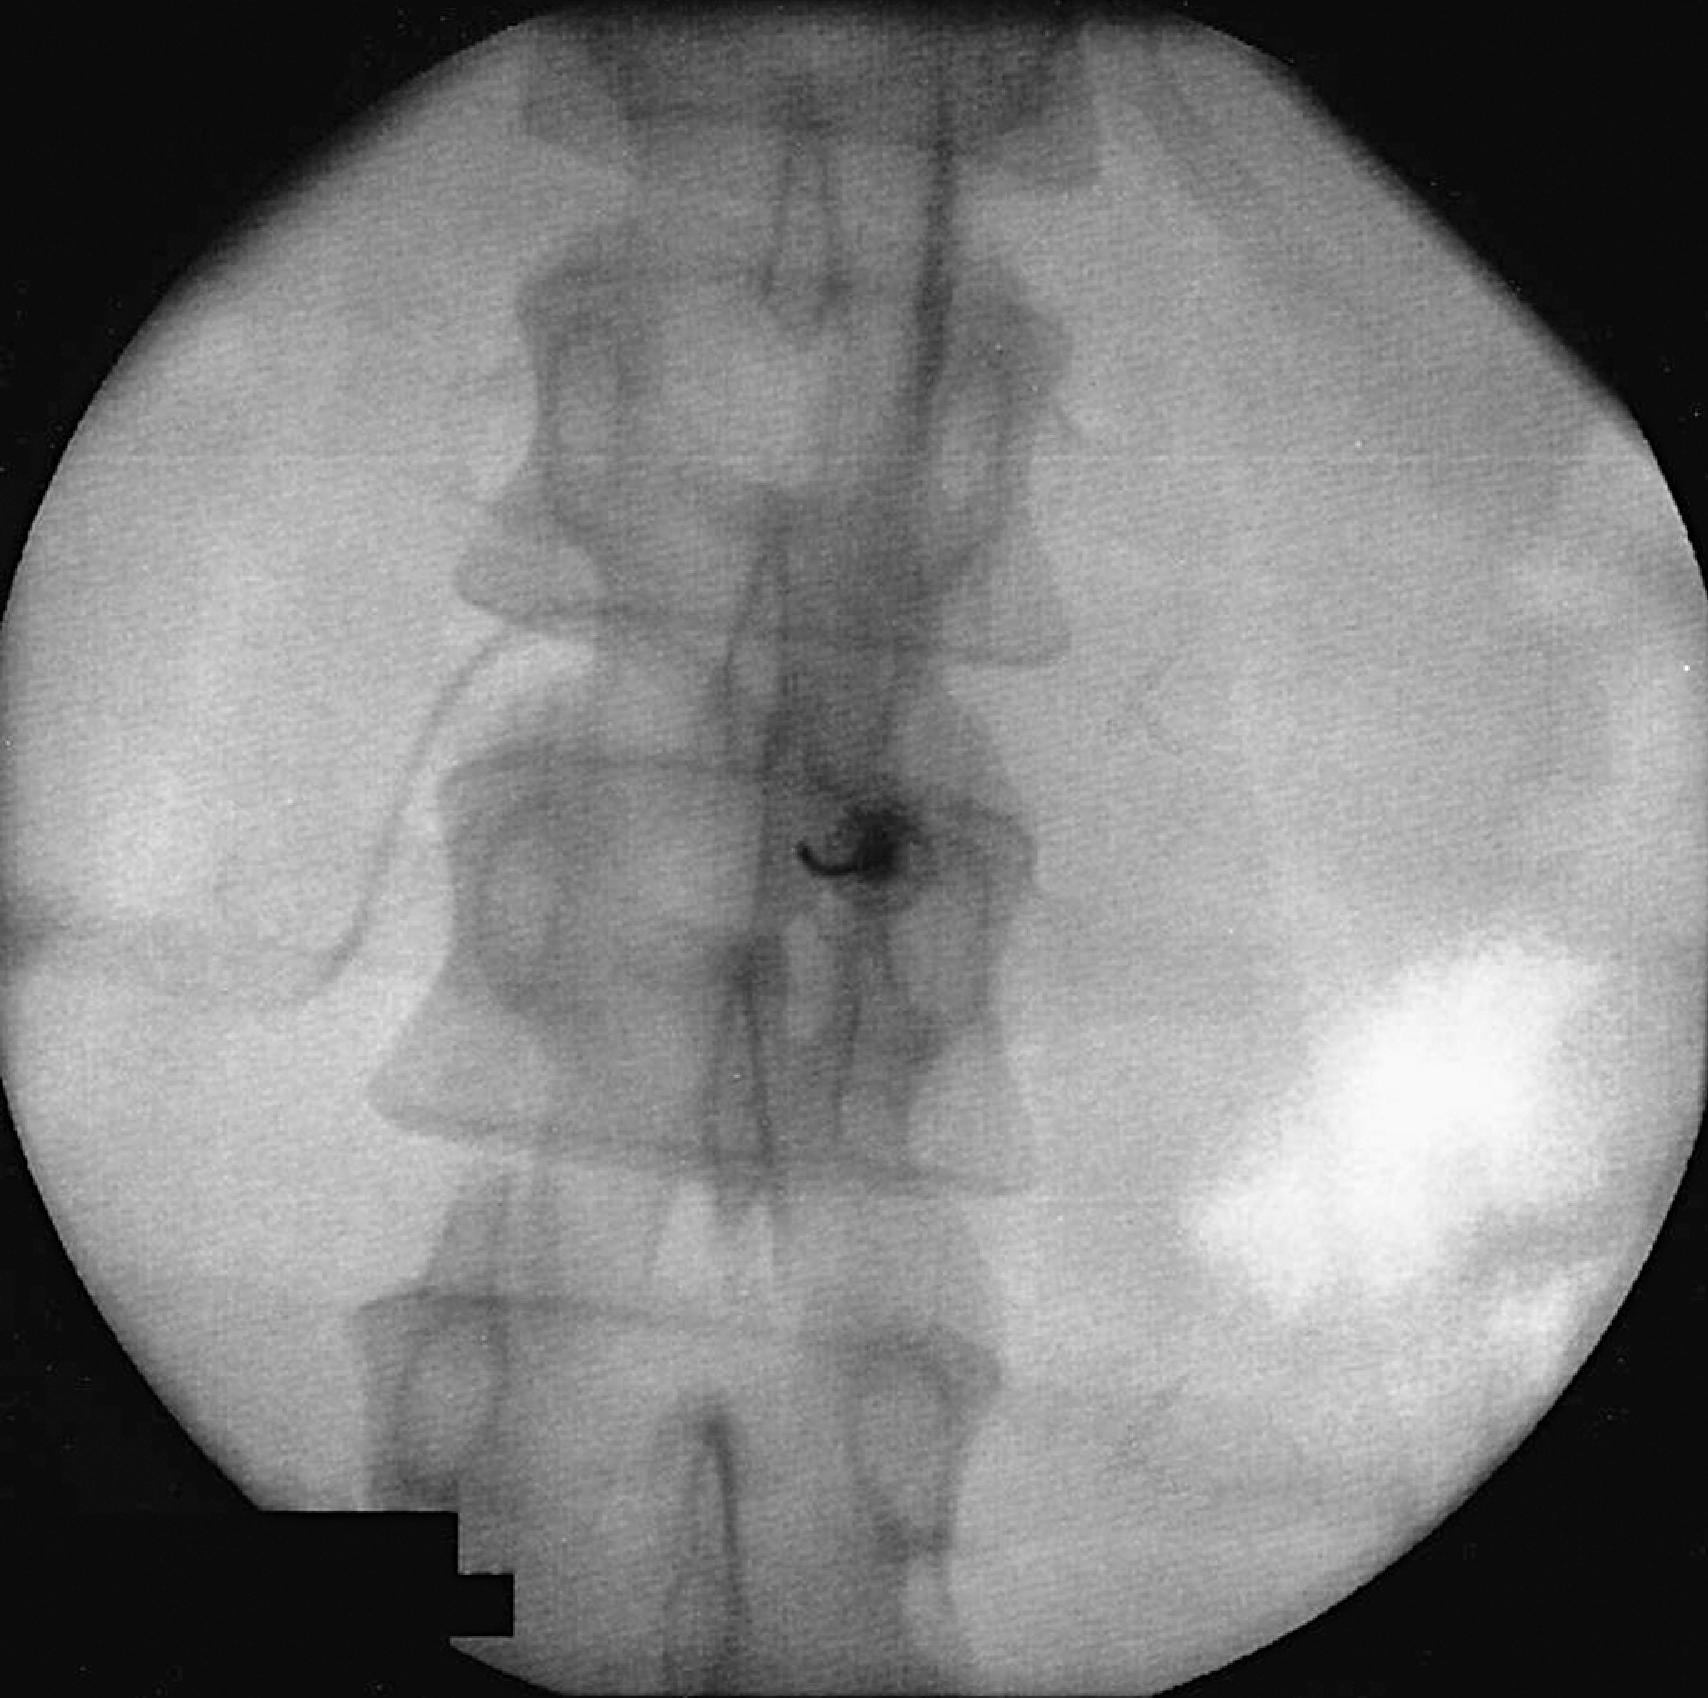 Figure 65.7, An interlaminar epidural procedure demonstrates one-sided spread at the same level and cephalad to the injection.